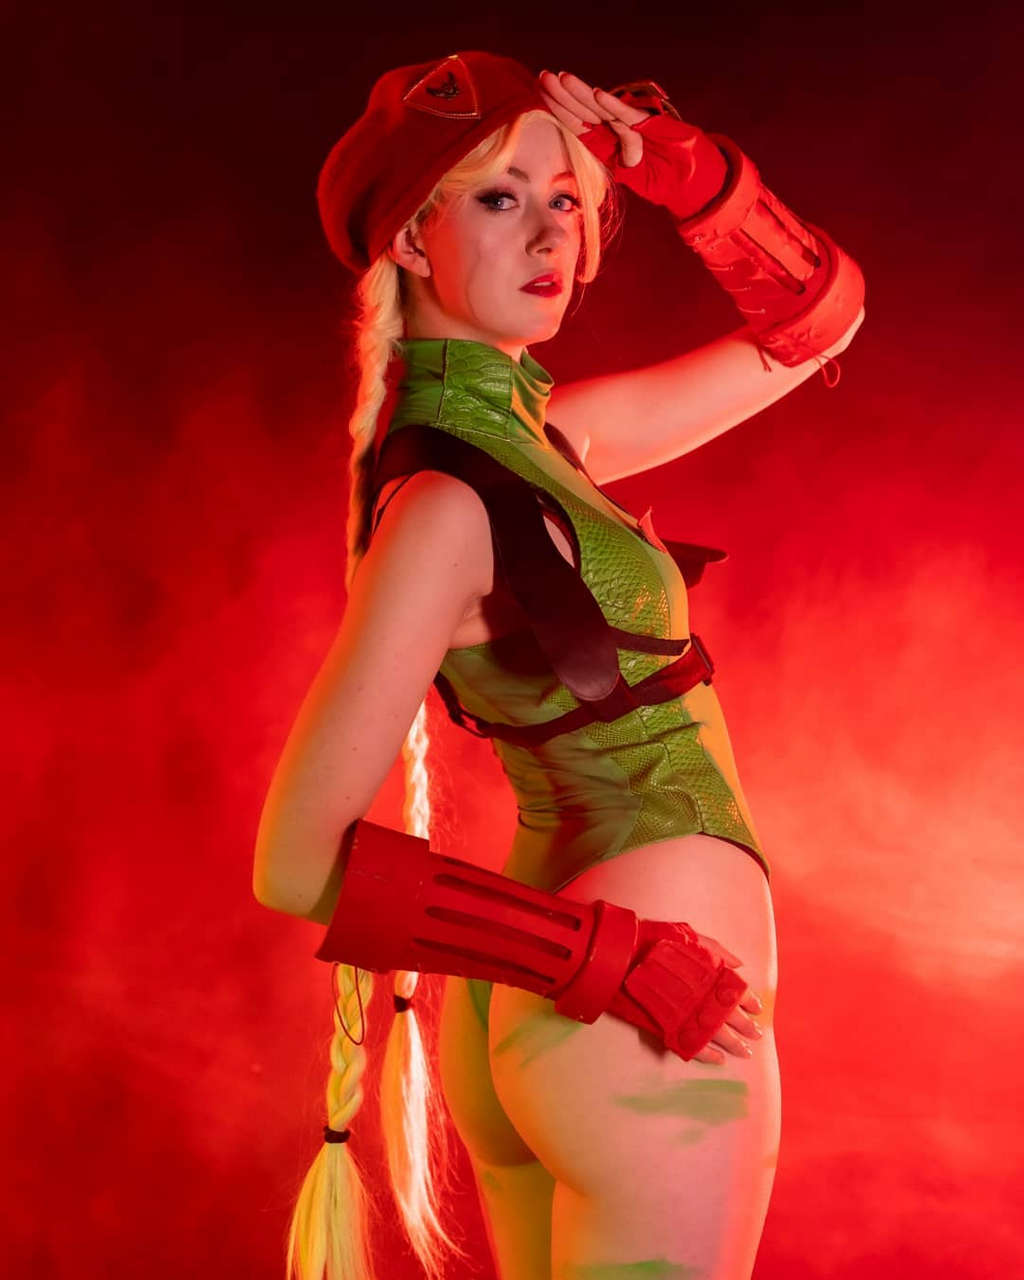 Cammy By Mimiyede